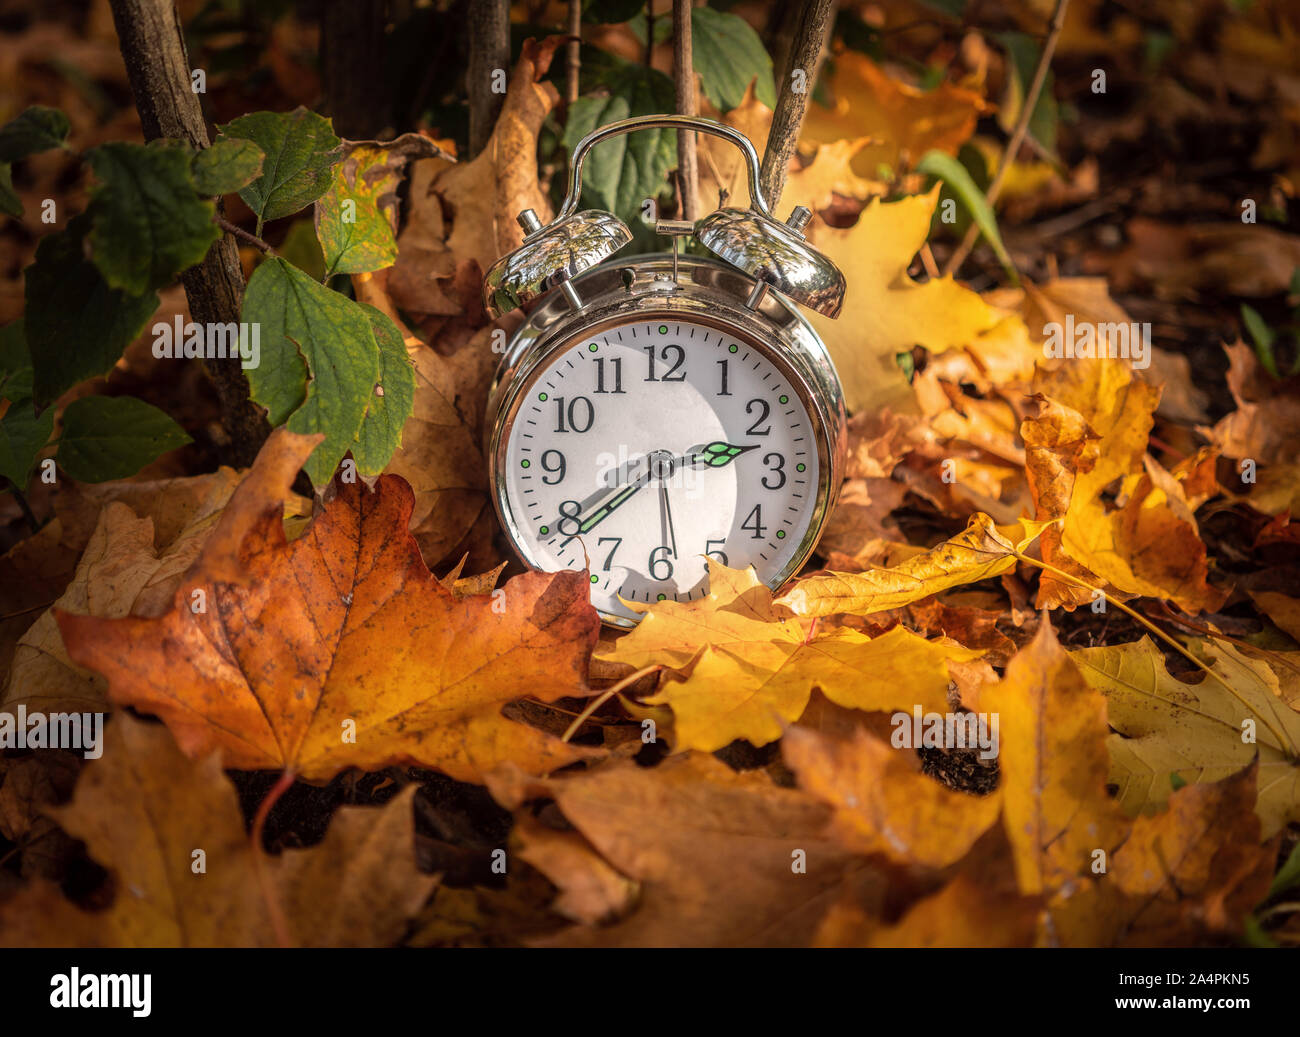 An alarm clock in midst colourful autumn leaves, end of summer time / daylight saving concept Stock Photo